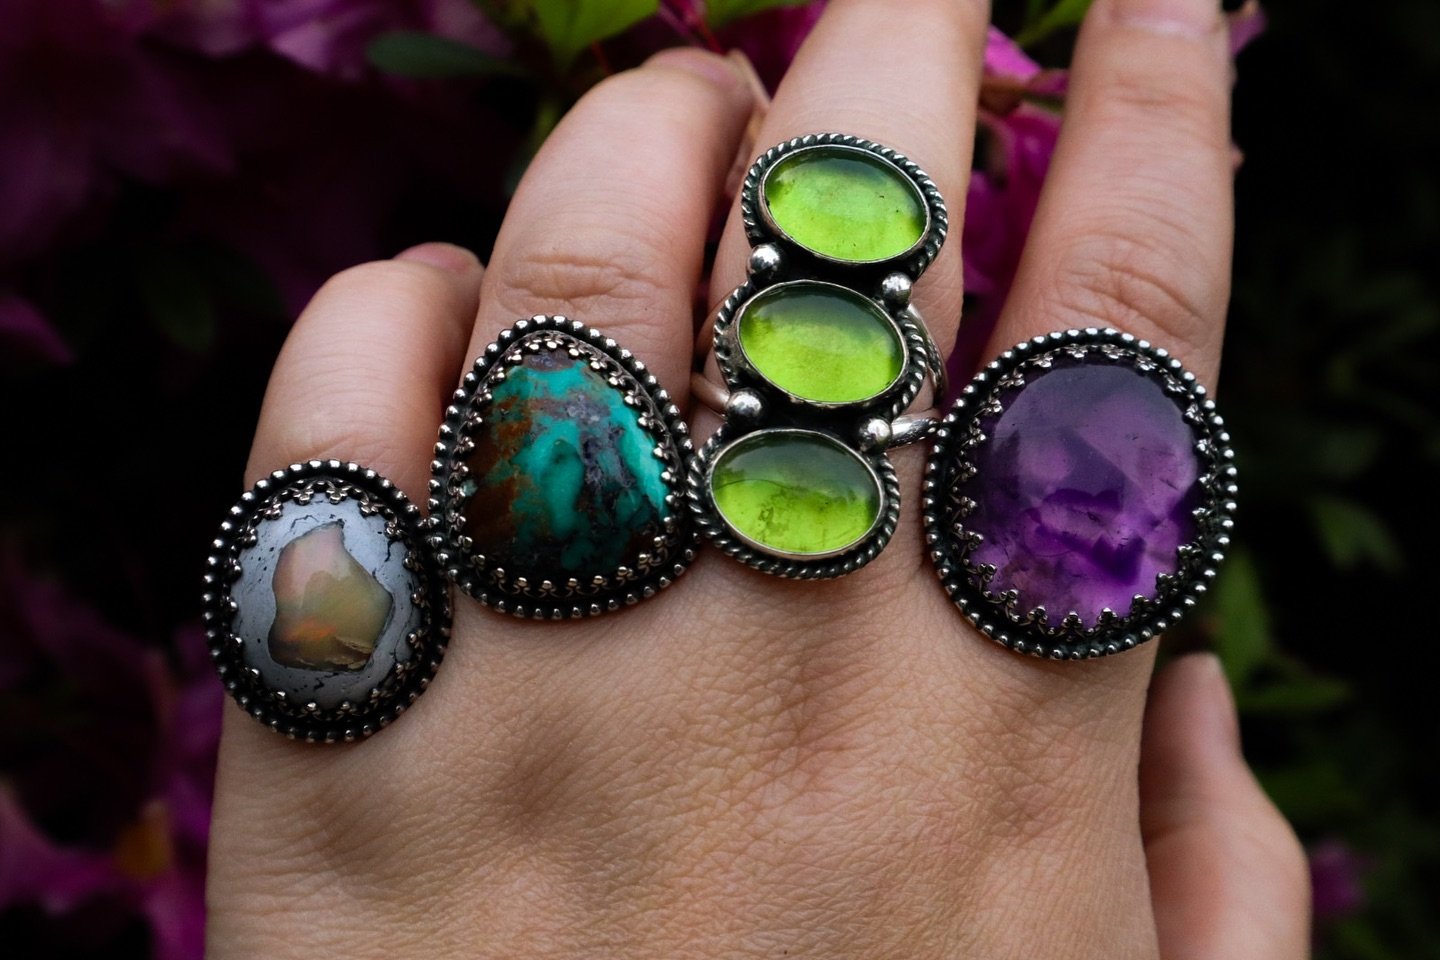 Getting ready for Murfreesboro Punk Rock Flea Market this Saturday and I&rsquo;ve got a fresh line up of rings to bring with me! Mexican Opal (7), Turquoise (8.5), Caribbean Green Amber (9.75), and Atomic Amethyst (9). Be sure to stop by booth to try